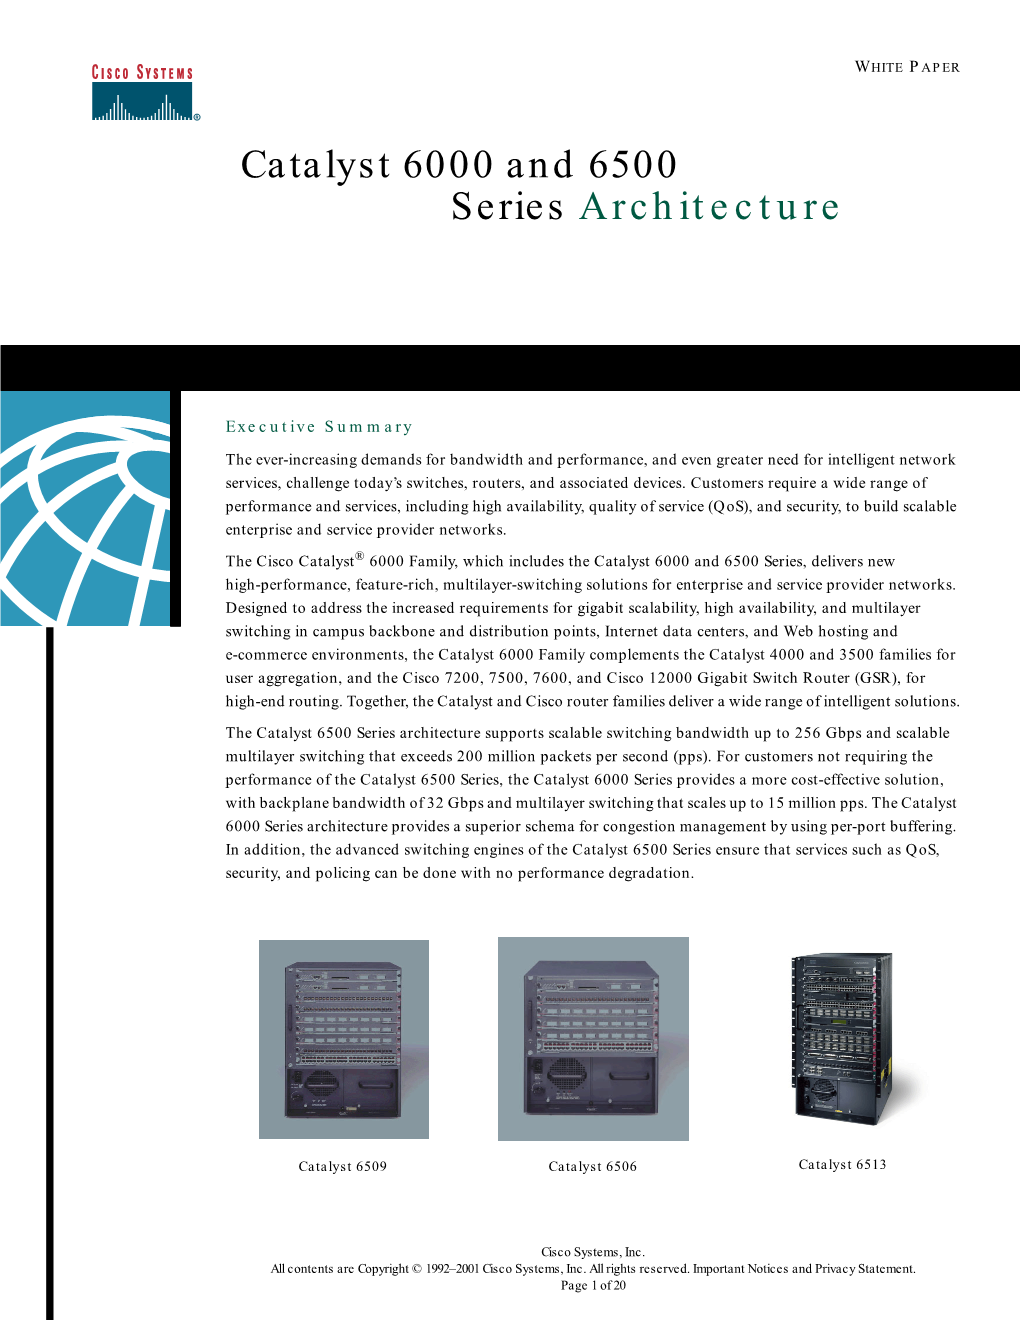 Catalyst 6000 and 6500 Series Architecture